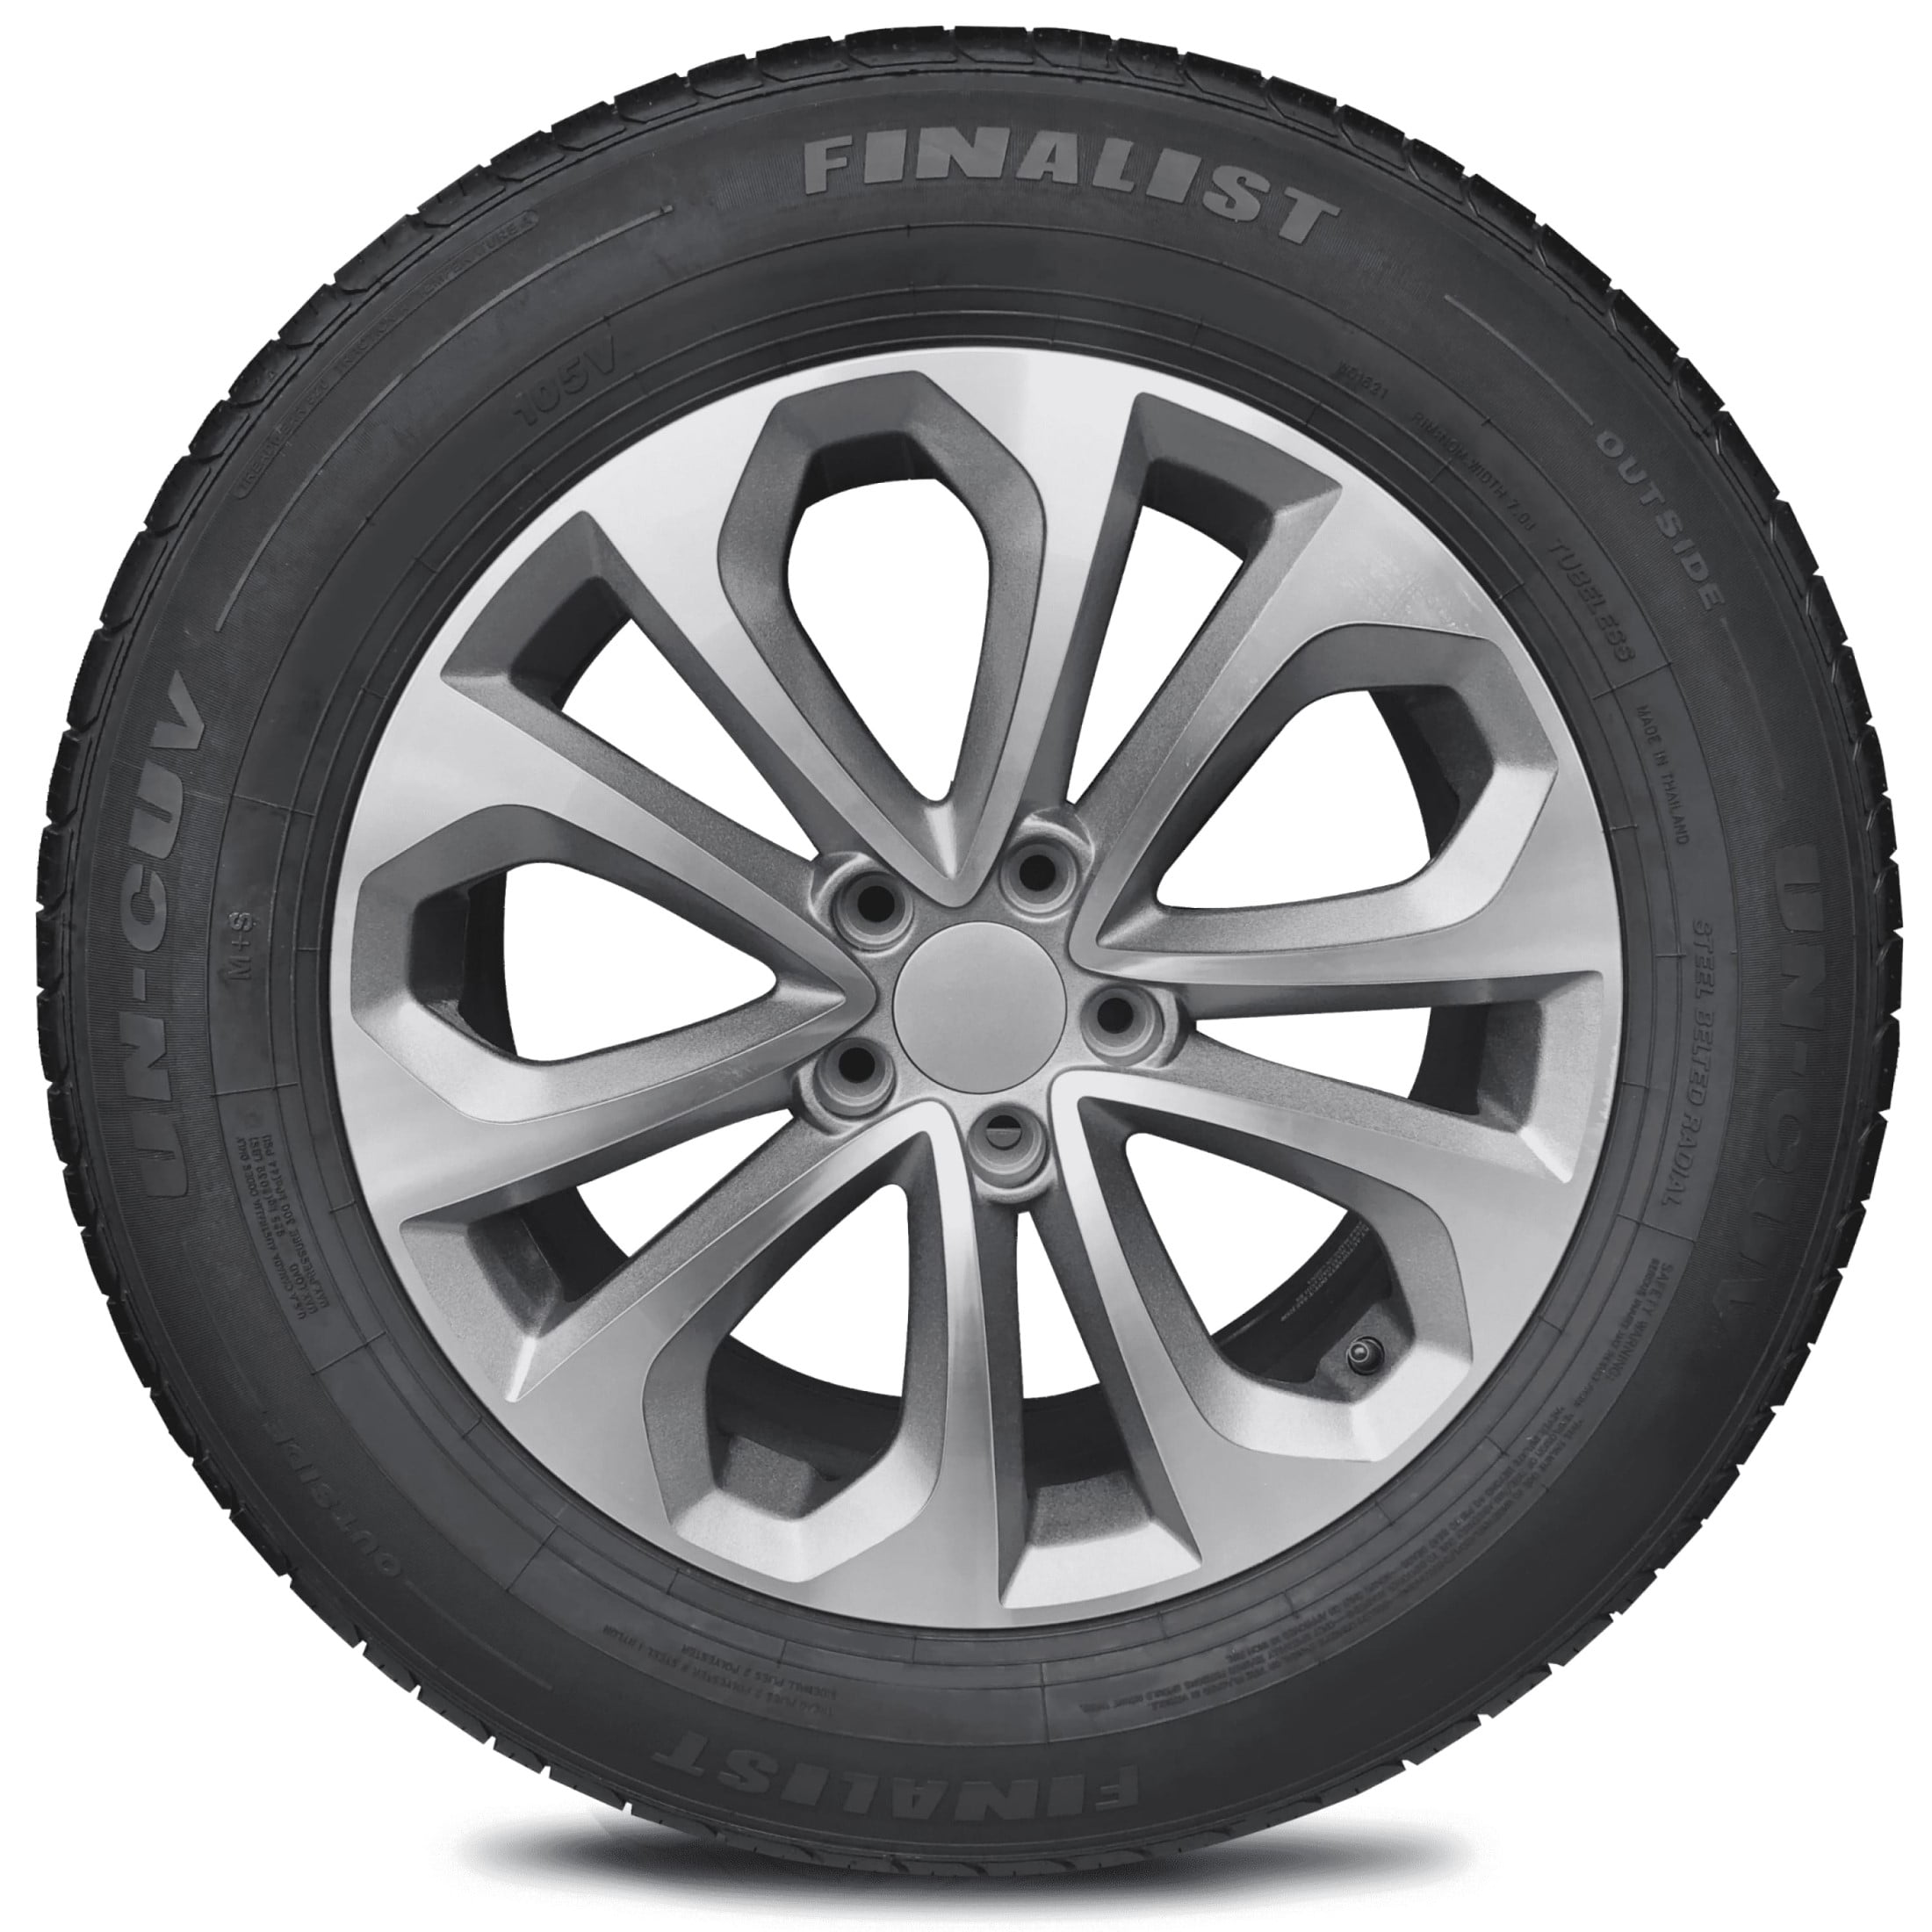 A/S (Tire Season 235/65R17 High All Load XL 235/65/17 Finalist Only) Tire SUV CUV Extra Performance 108V UN-CUV